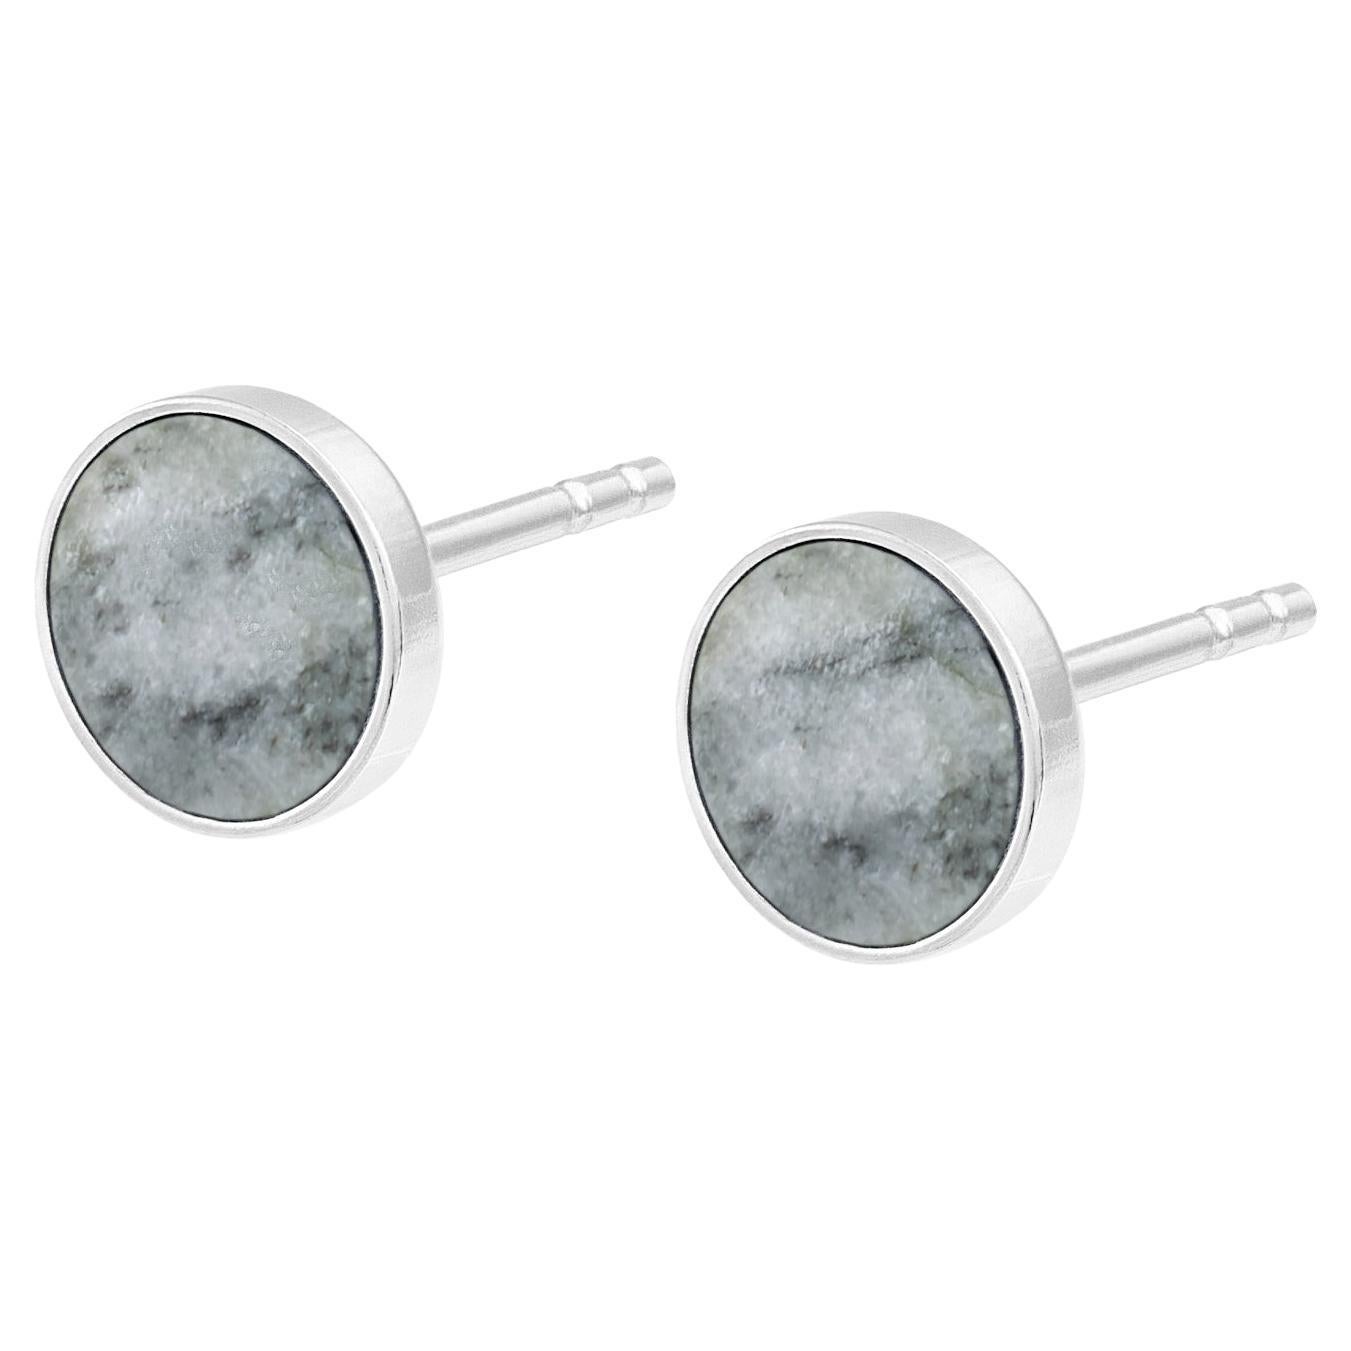 Small earrings studs with grey stone dolomite Picasso For Sale